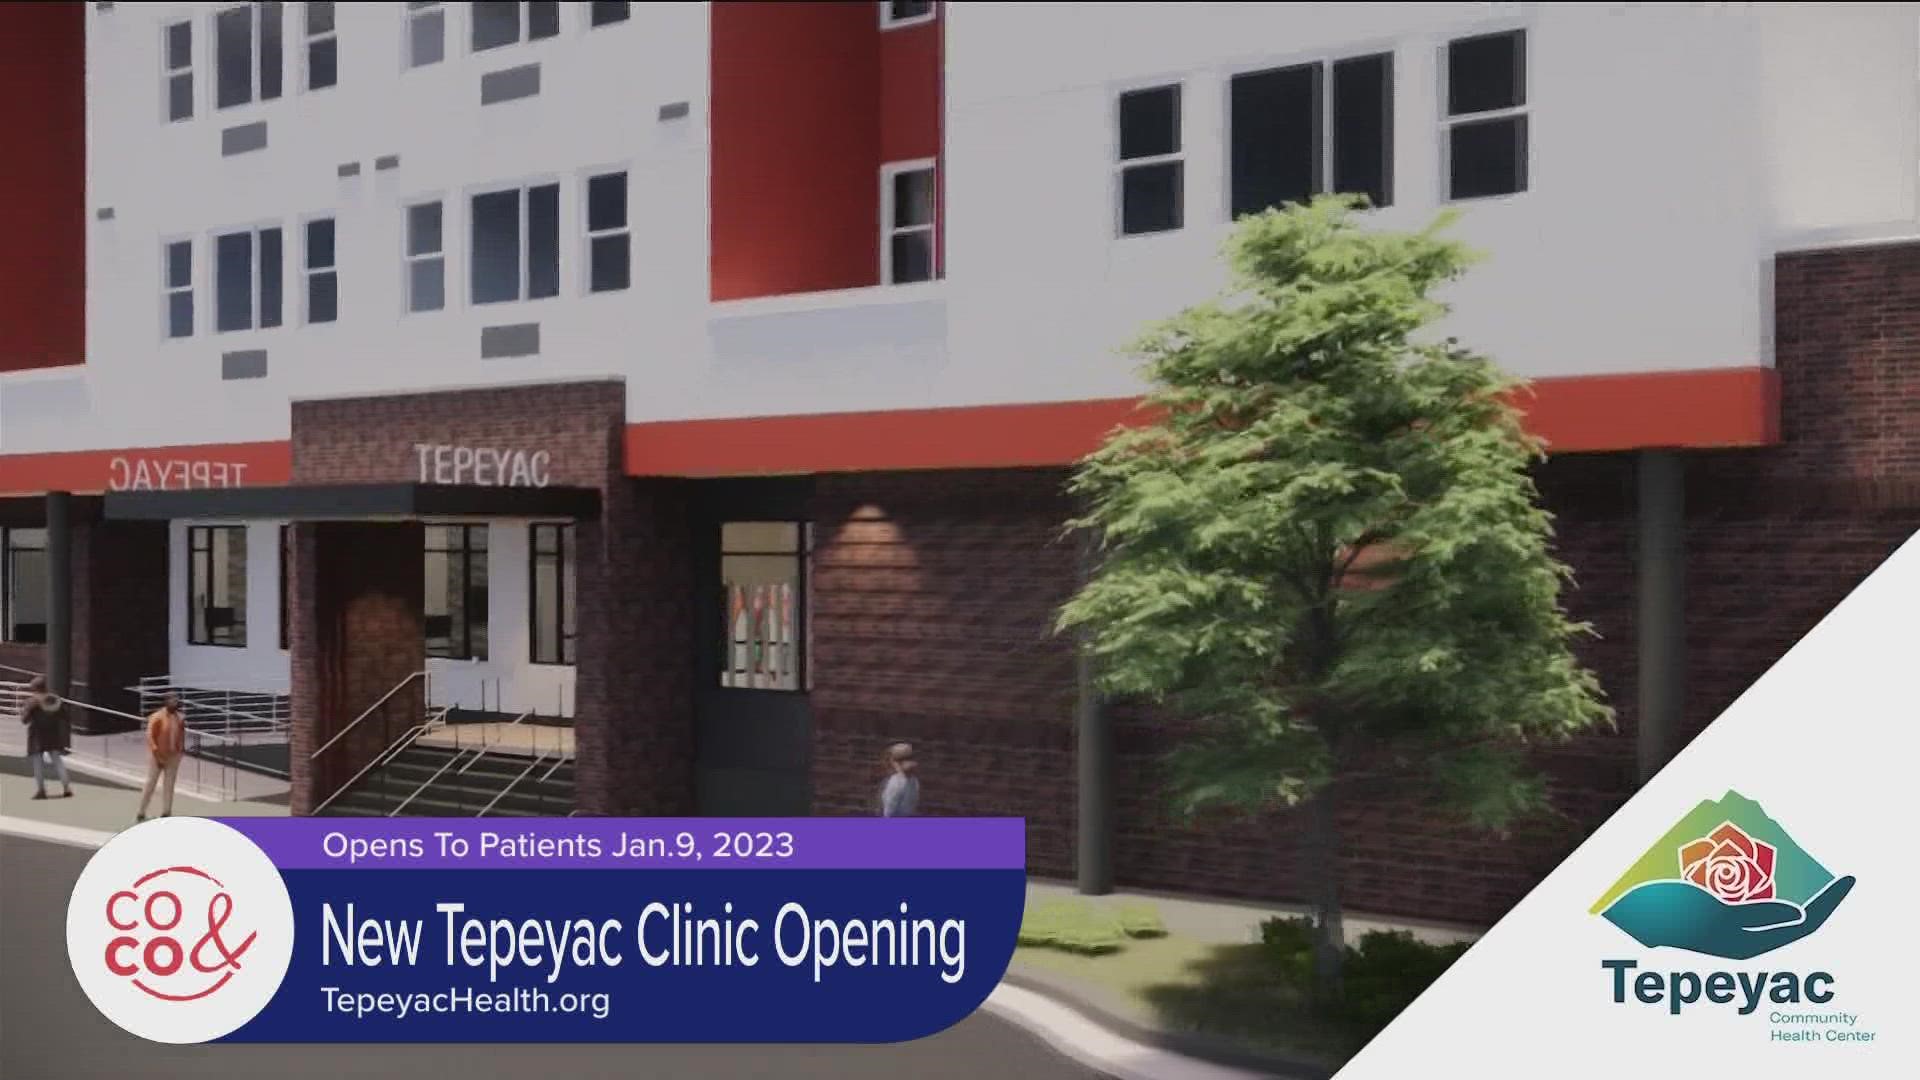 Tepeyac Community Health Center provides quality medical care in all stages of life. Learn more and make an appointment at TepeyacHealth.org.